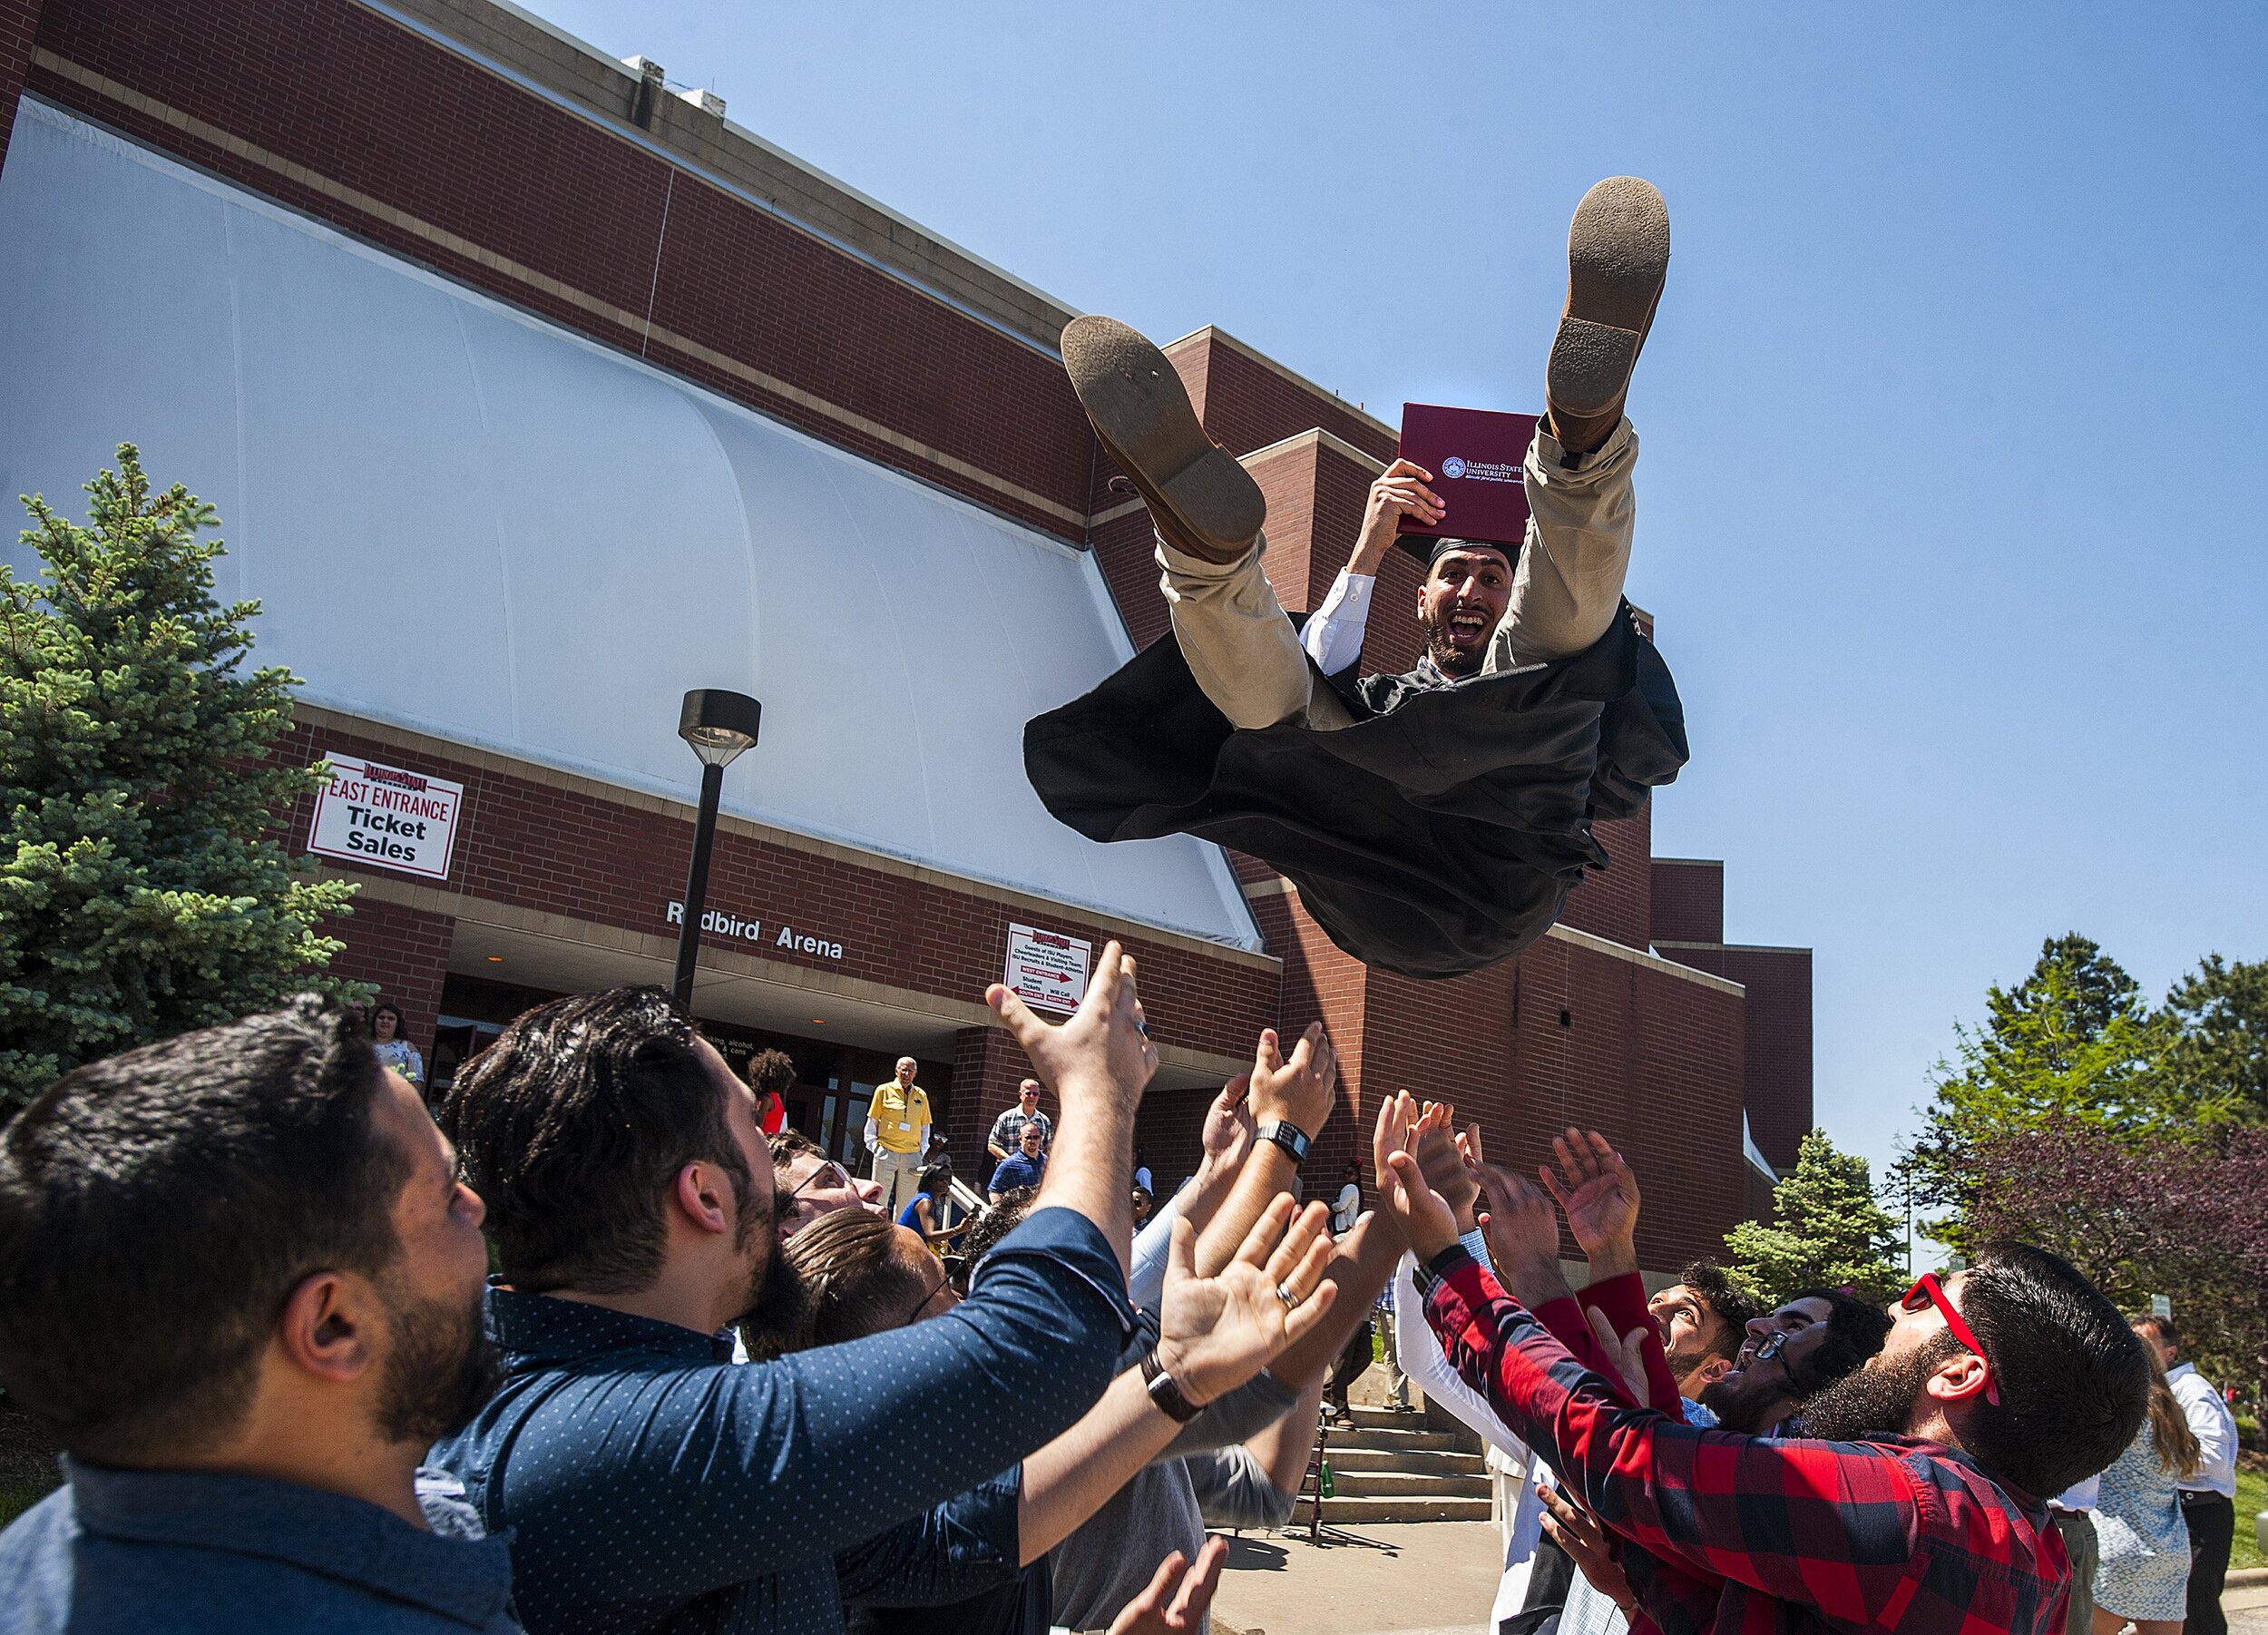  Illinois State University student Omar Qaddour, of Kansas City, Missouri, gets lifted into the air by friends as he celebrates his bachelor's degree in information technology following the 158th annual commencement for the College of Applied Science